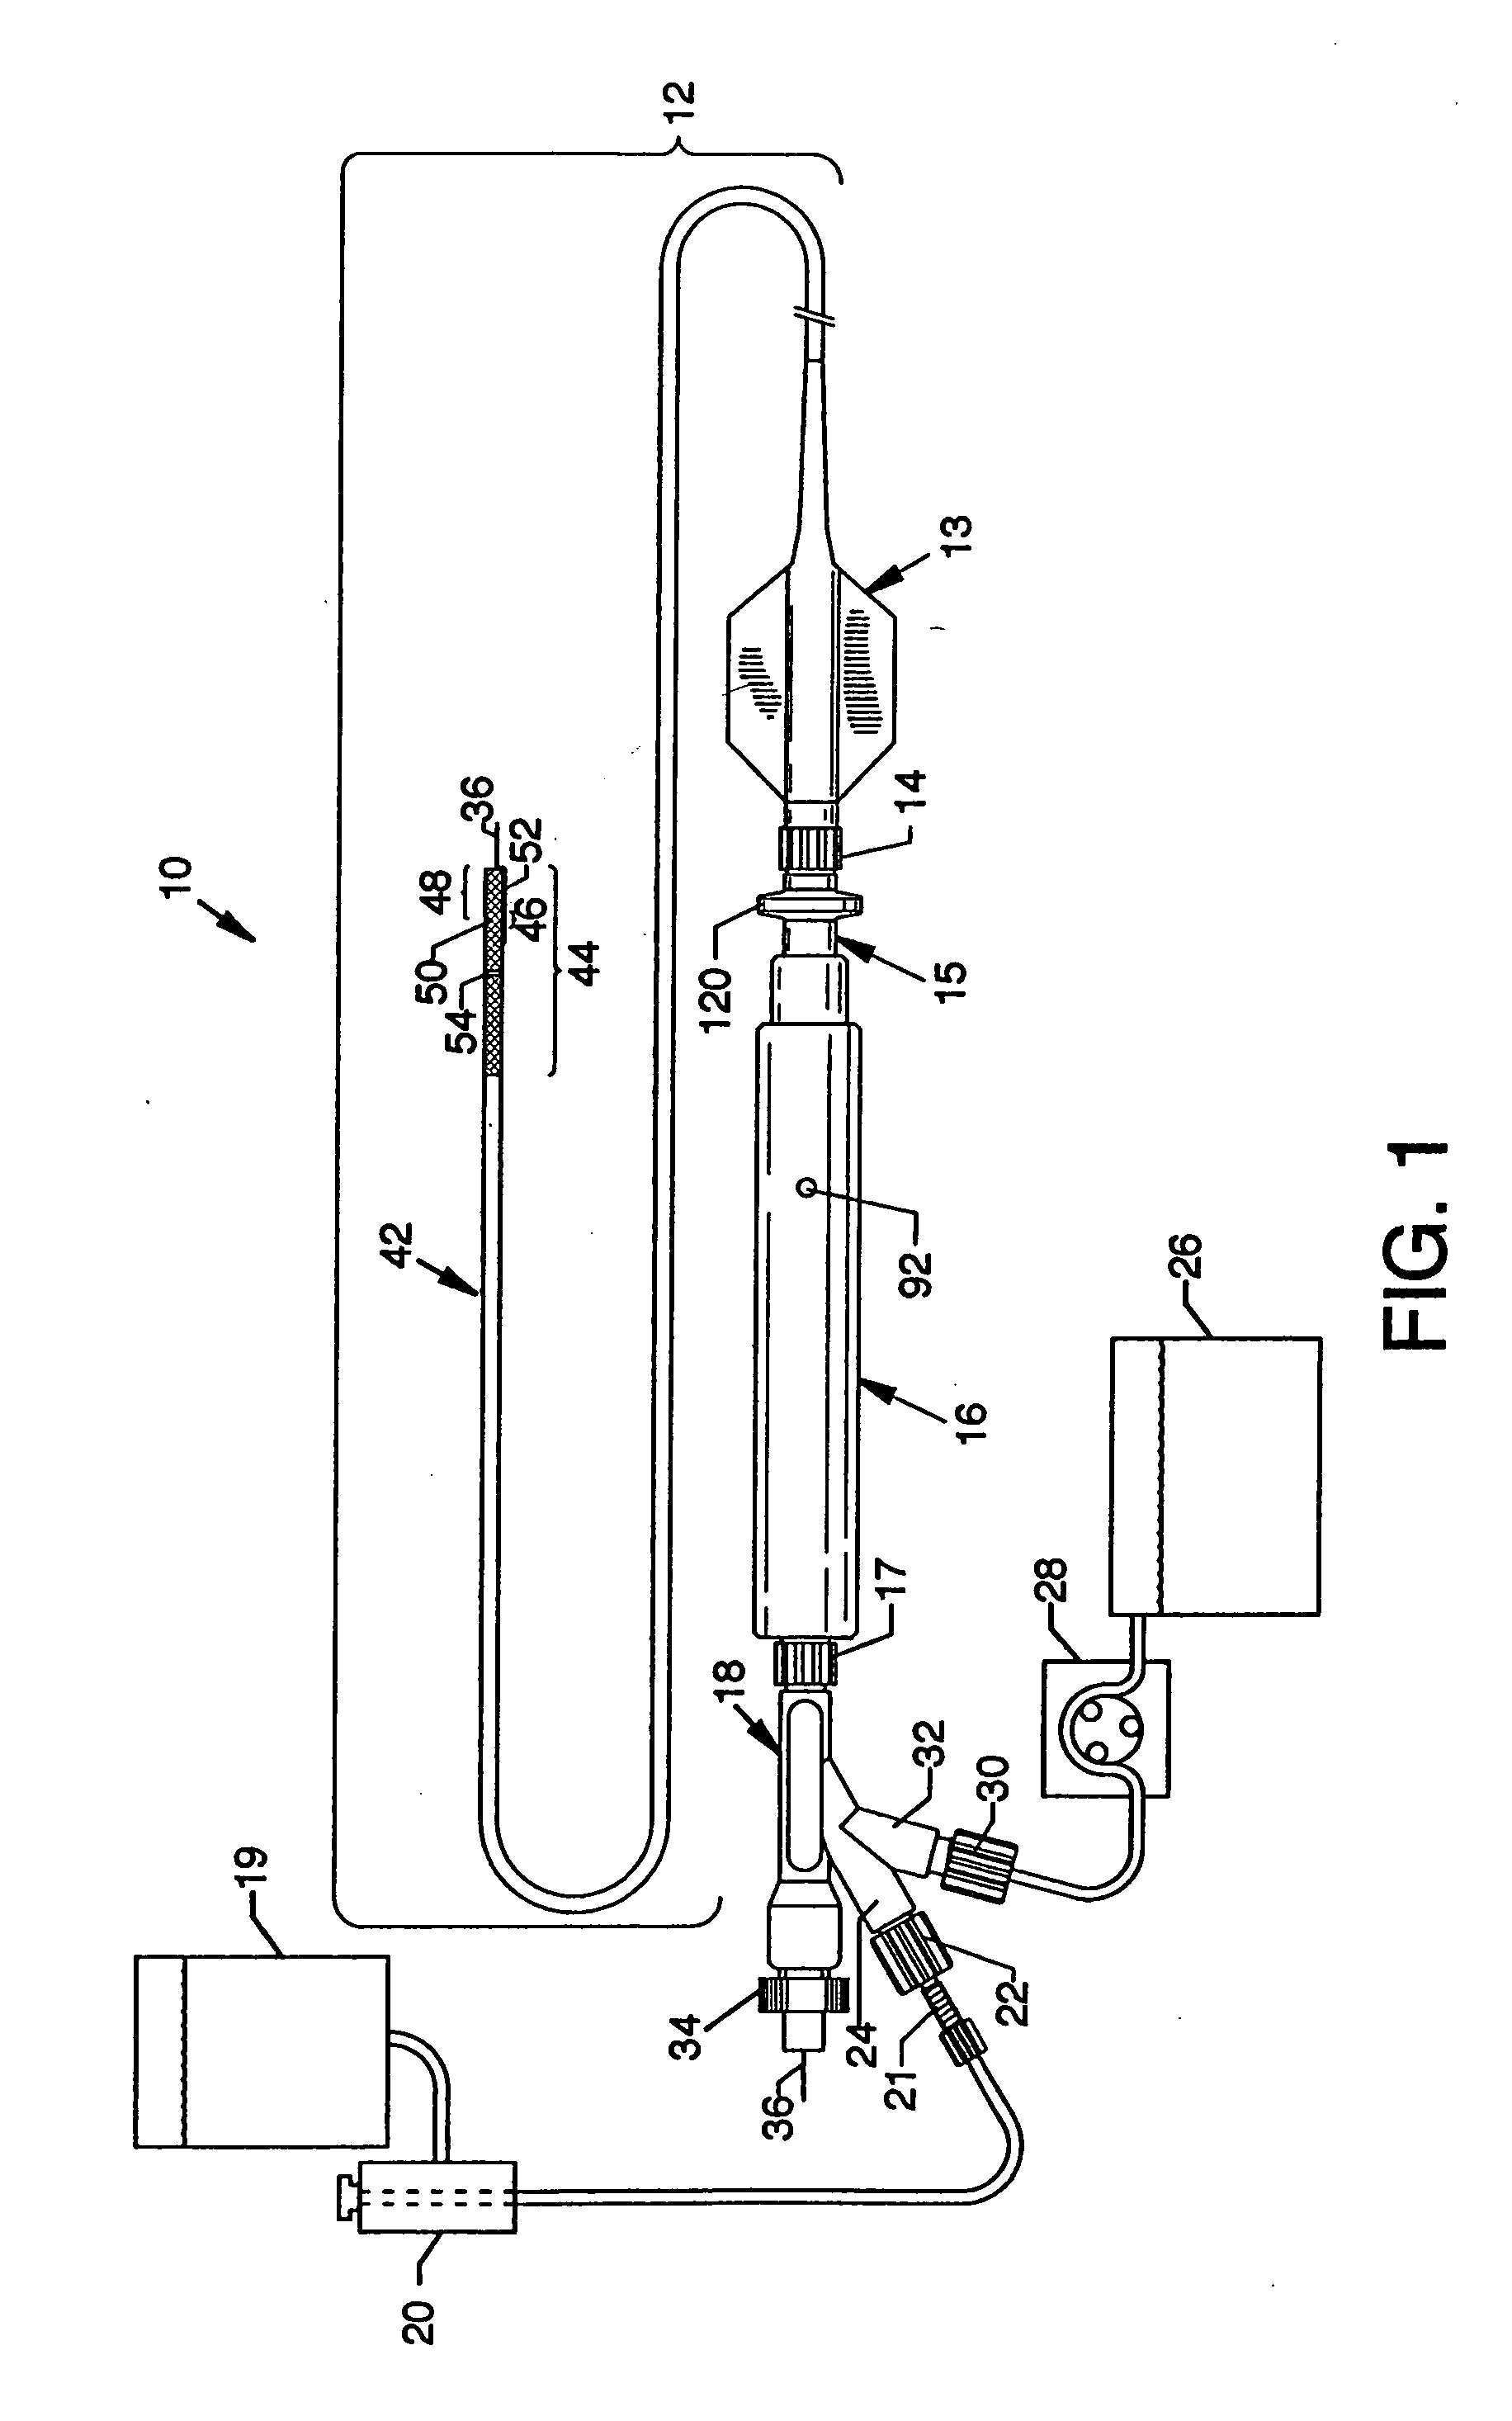 Atherectomy system having a variably exposed cutter